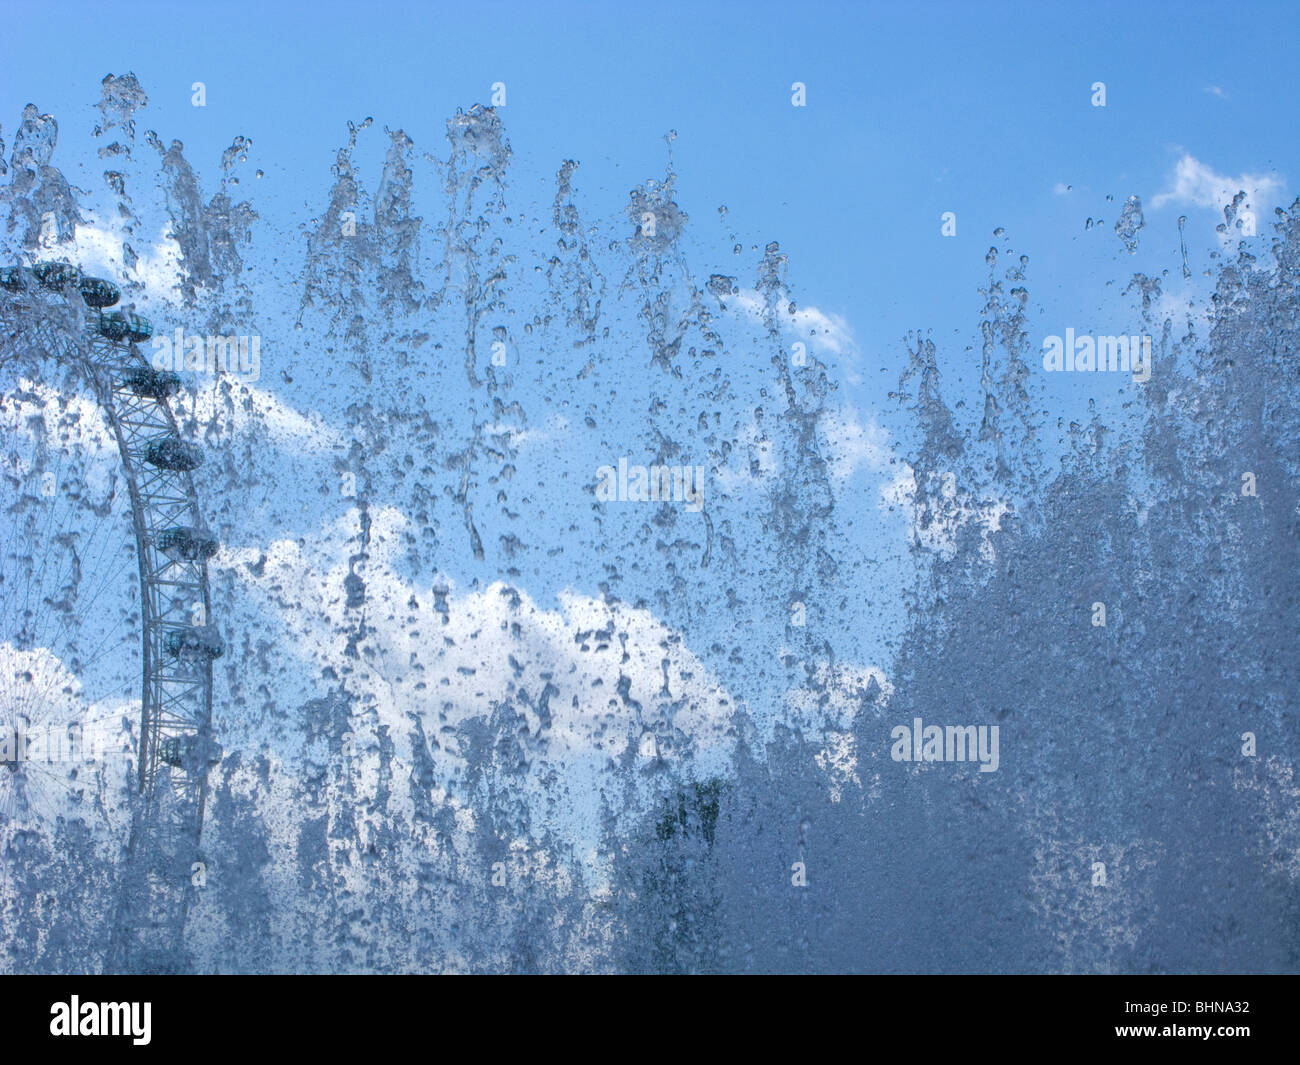 Water installation on the South Bank called Appearing rooms, London Engalnd UK Stock Photo